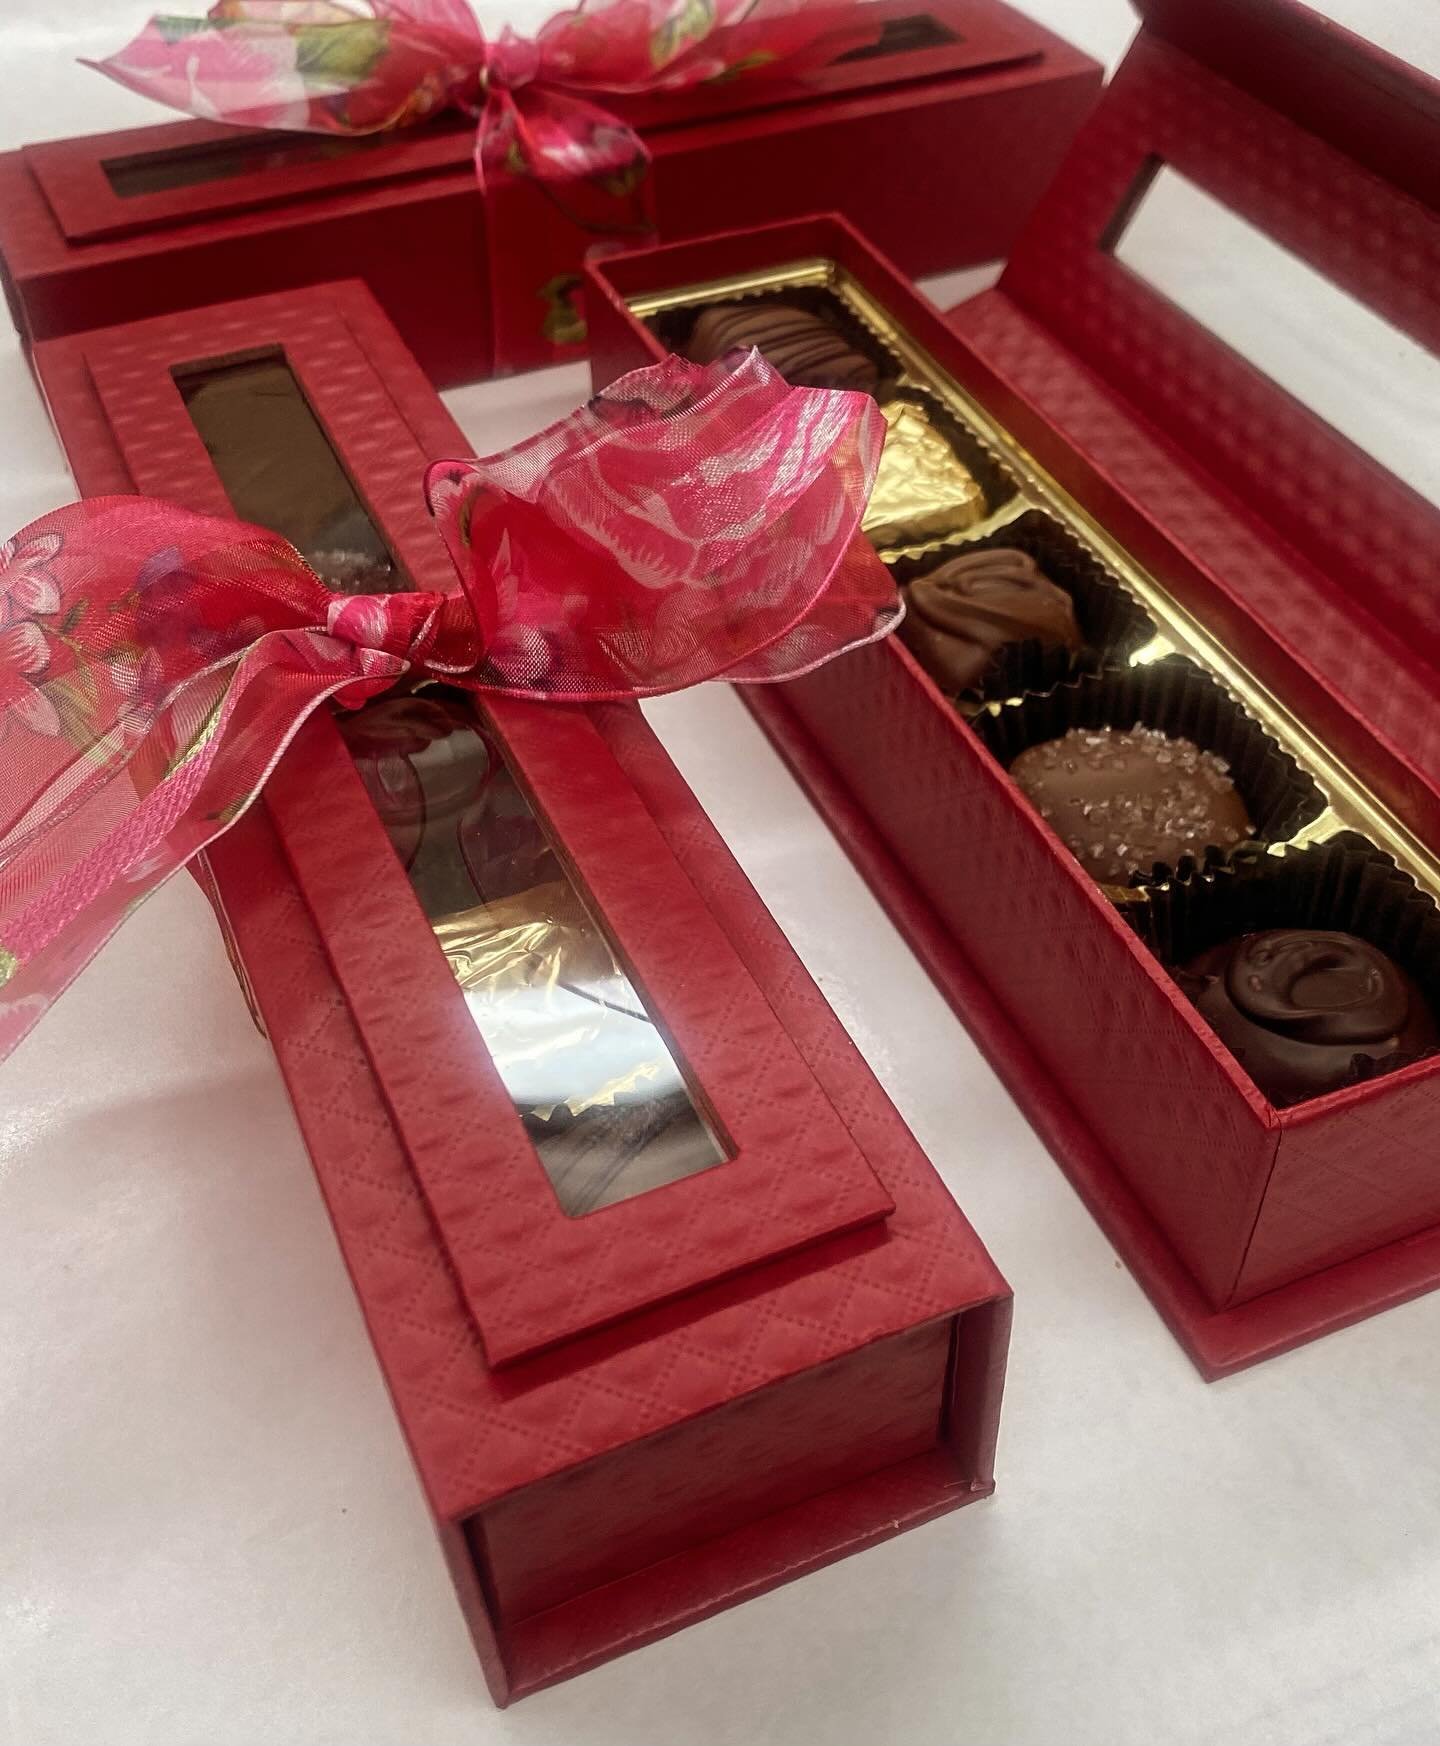 Looking for last minute Mother&rsquo;s Day gifts&hellip;.we have you covered. This elegant box is only 11.95. Come in and pick the flavors she will like best❤️ #shopsmall #shopsmallslc #guittardchocolate #mothersdaygift #chefrubber #chocolates